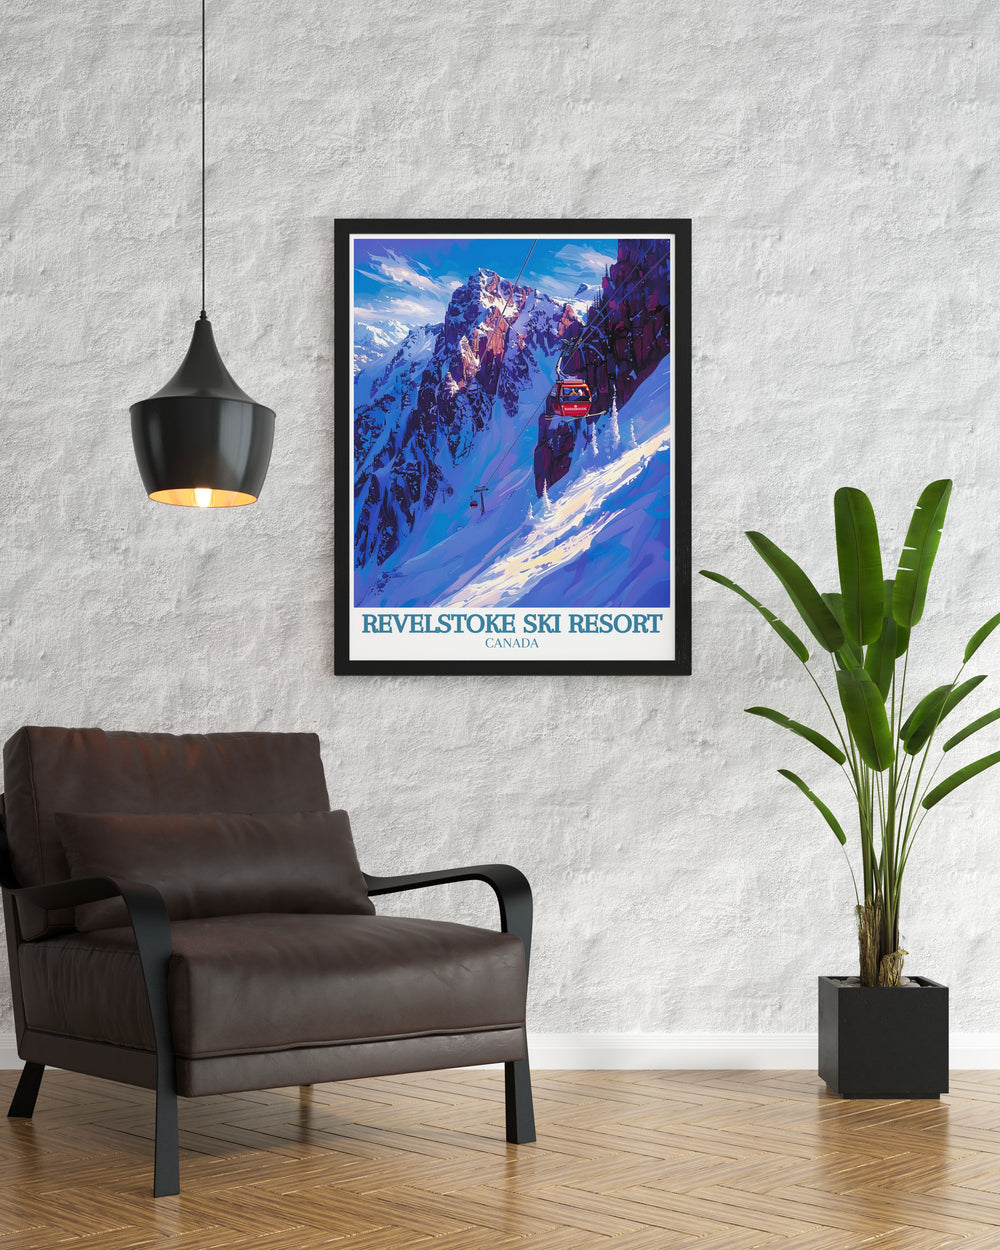 Revelstoke Poster featuring Mount Mackenzie and the Revelation Gondola cable car. This Ski Resort Print brings the beauty of British Columbia into your home. Perfect for adding a touch of adventure and elegance to your decor.